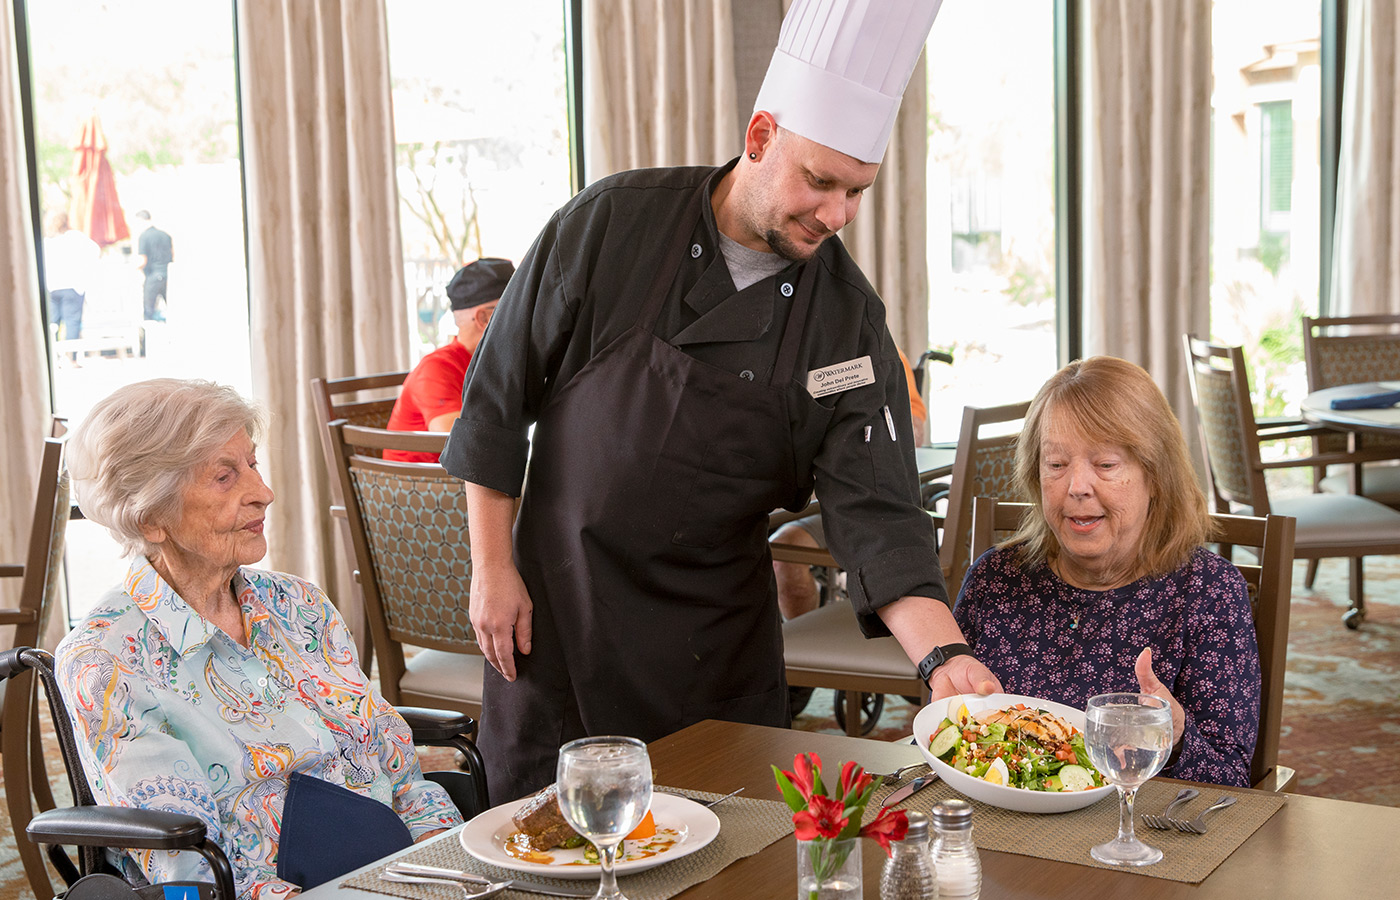 chef placing a plate of food down in front of resident at dining table